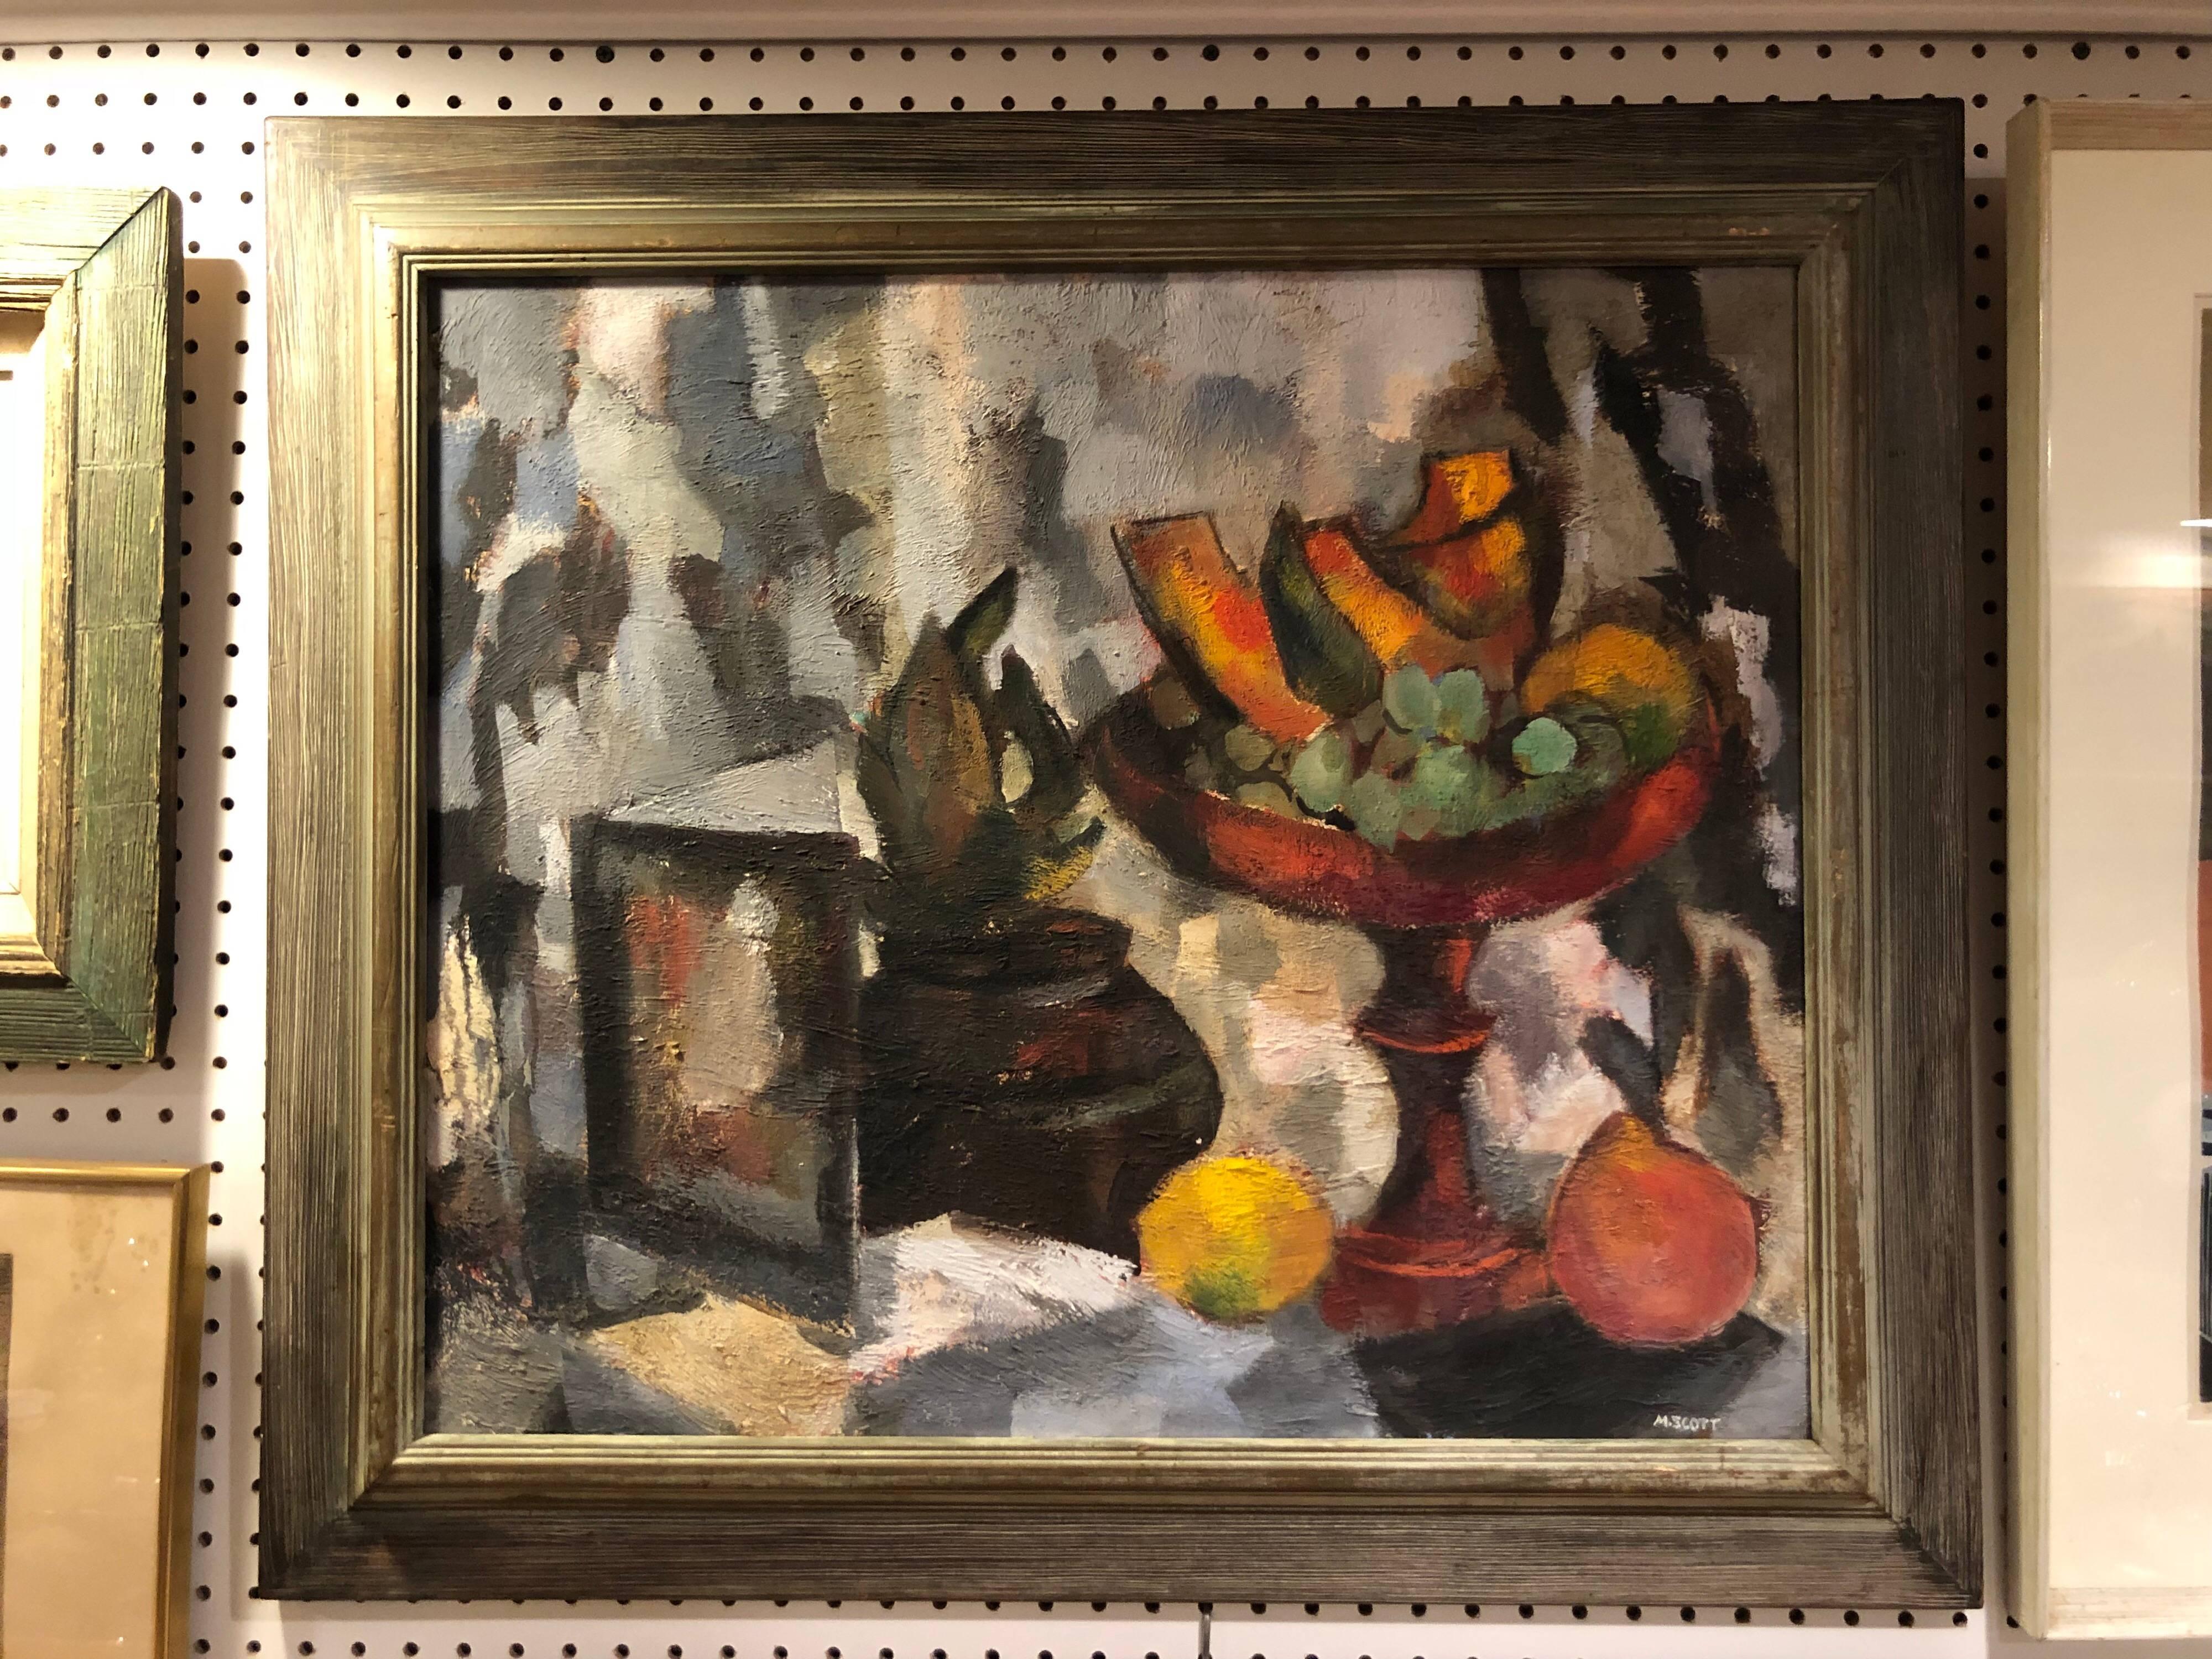 Mid-Century Modern still life of fruit by M. Scott. M. Scott is a listed artist. Nice Impasto style oil on canvas with soft muted earth tones. Great for any kitchen or dining room.